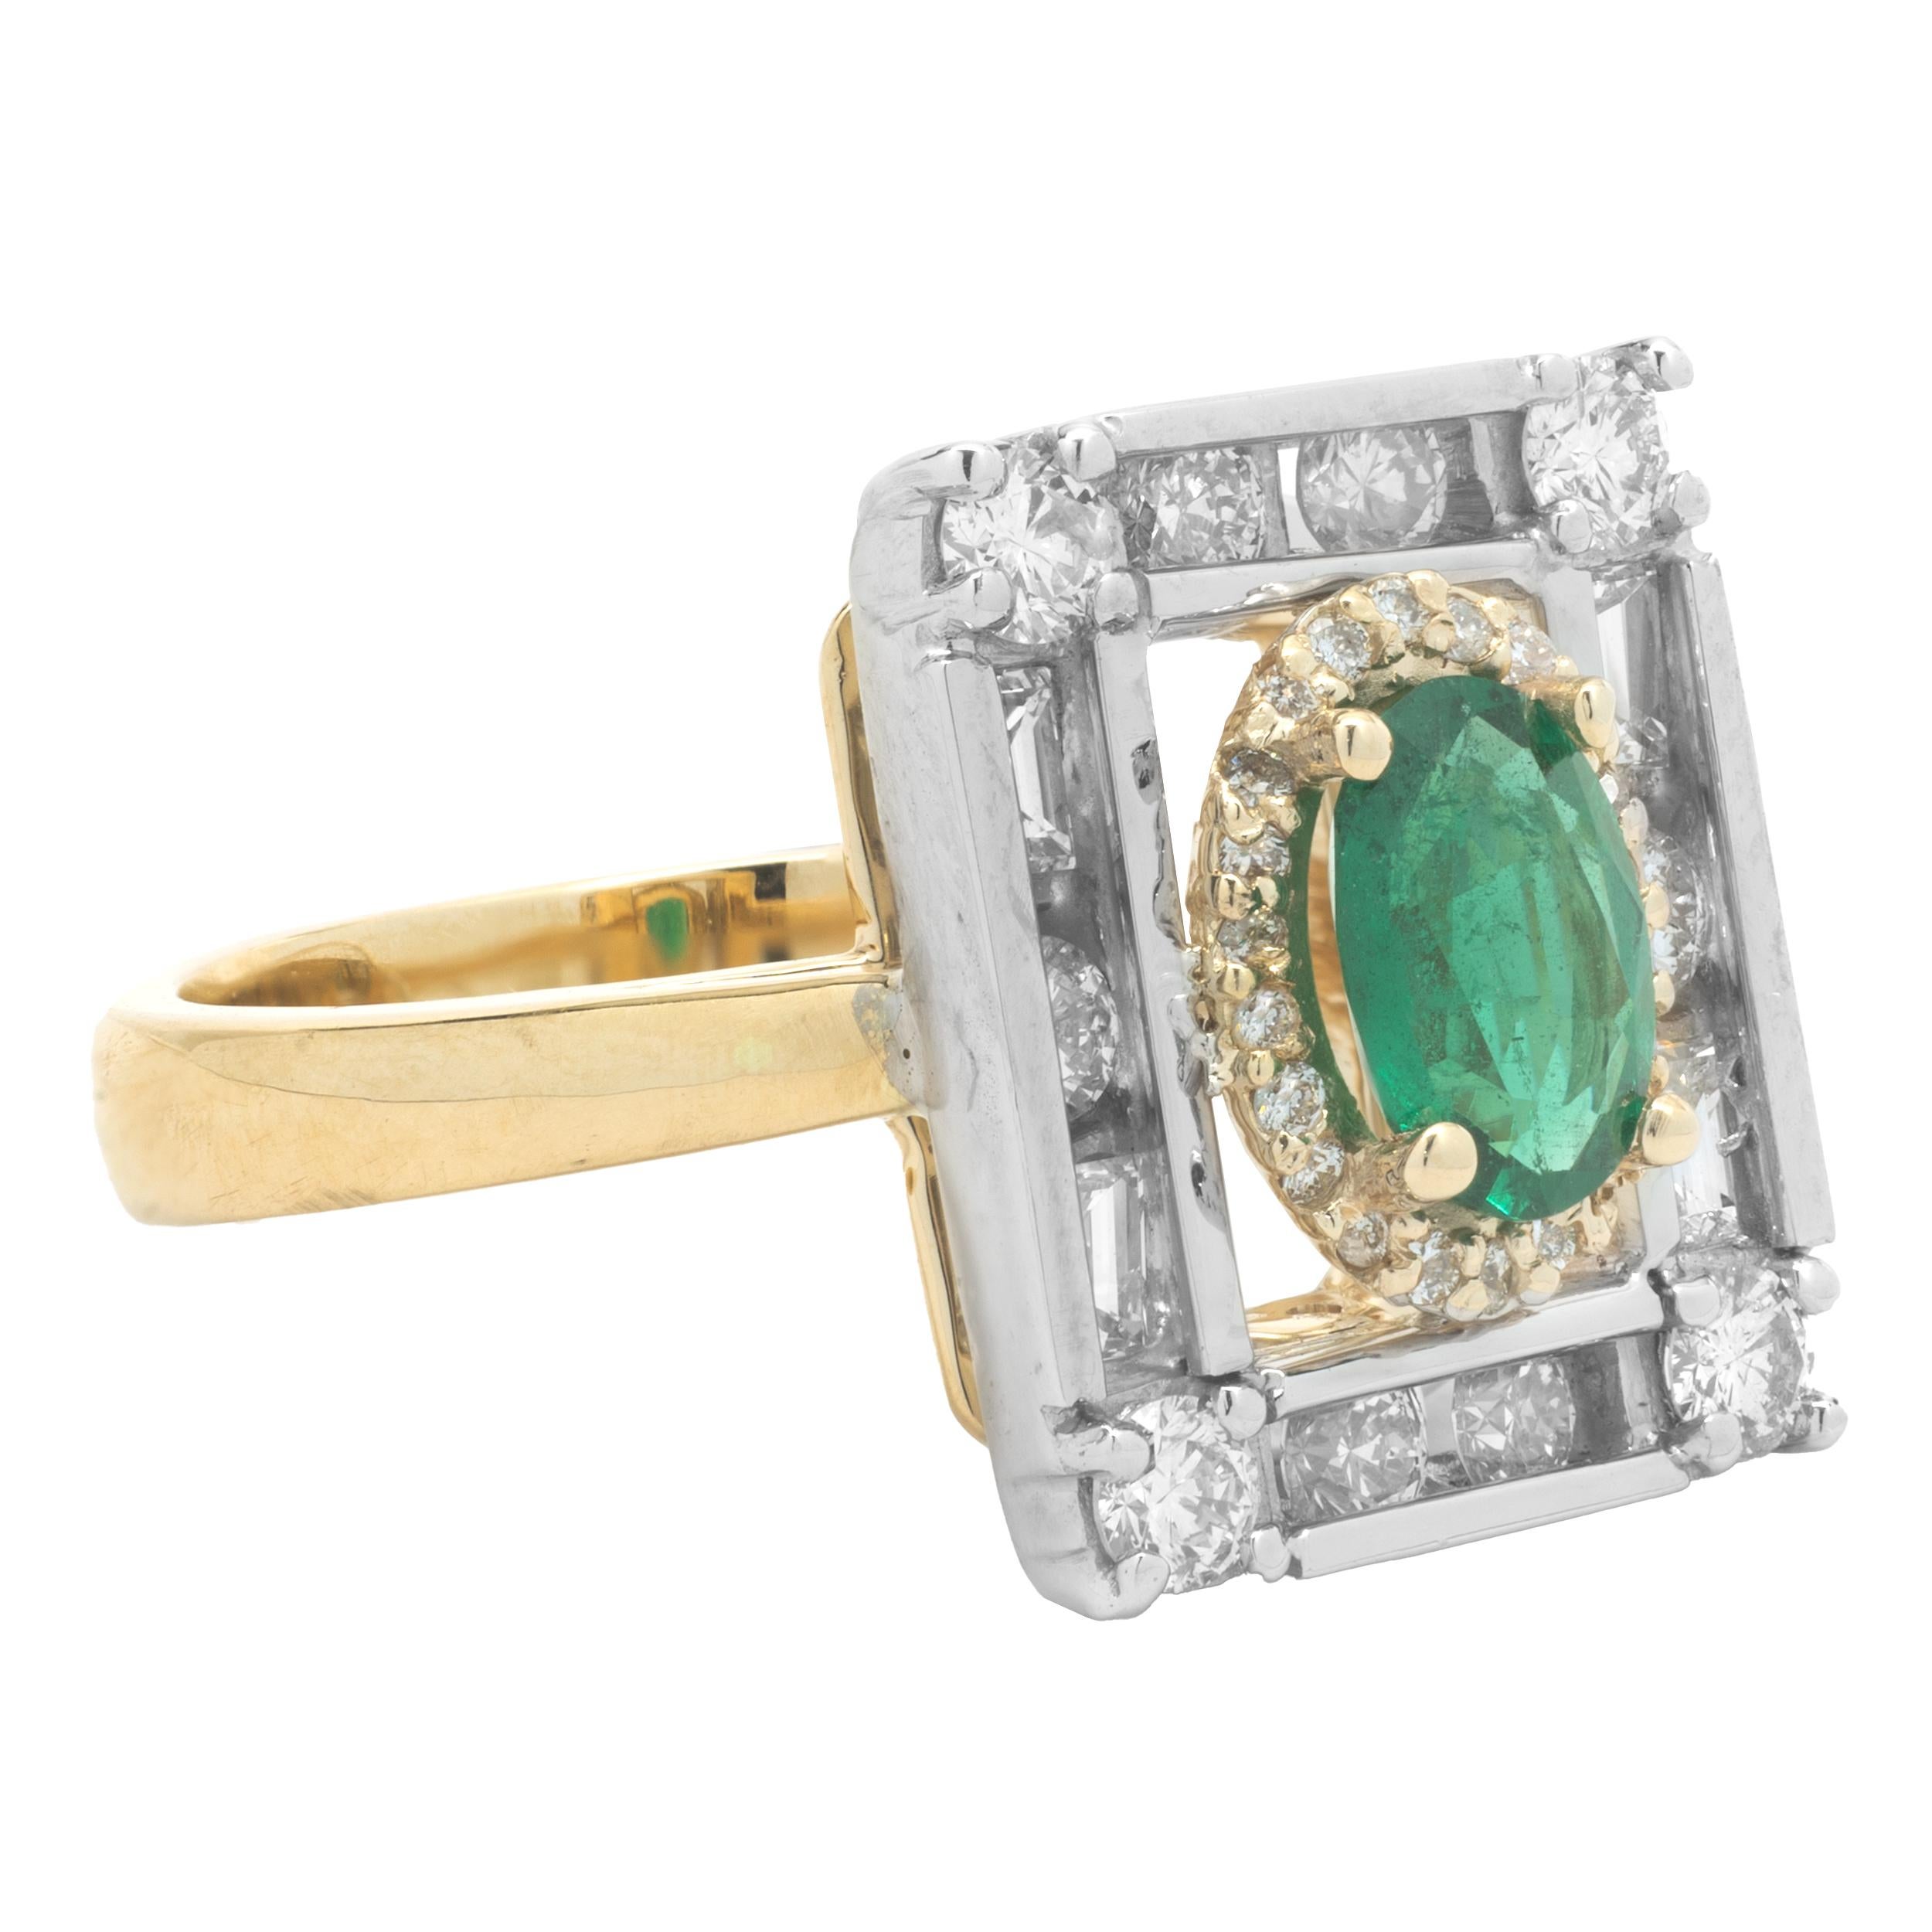 Material: 14K white and yellow gold
Diamond: 10 round brilliant & 4 baguette cut = 1.22cttw
Color: G
Clarity: SI1
Emerald: 1 oval cut = 0.70ct
Ring Size: 6.75 (please allow up to 2 additional business days for sizing requests)
Dimensions: ring top